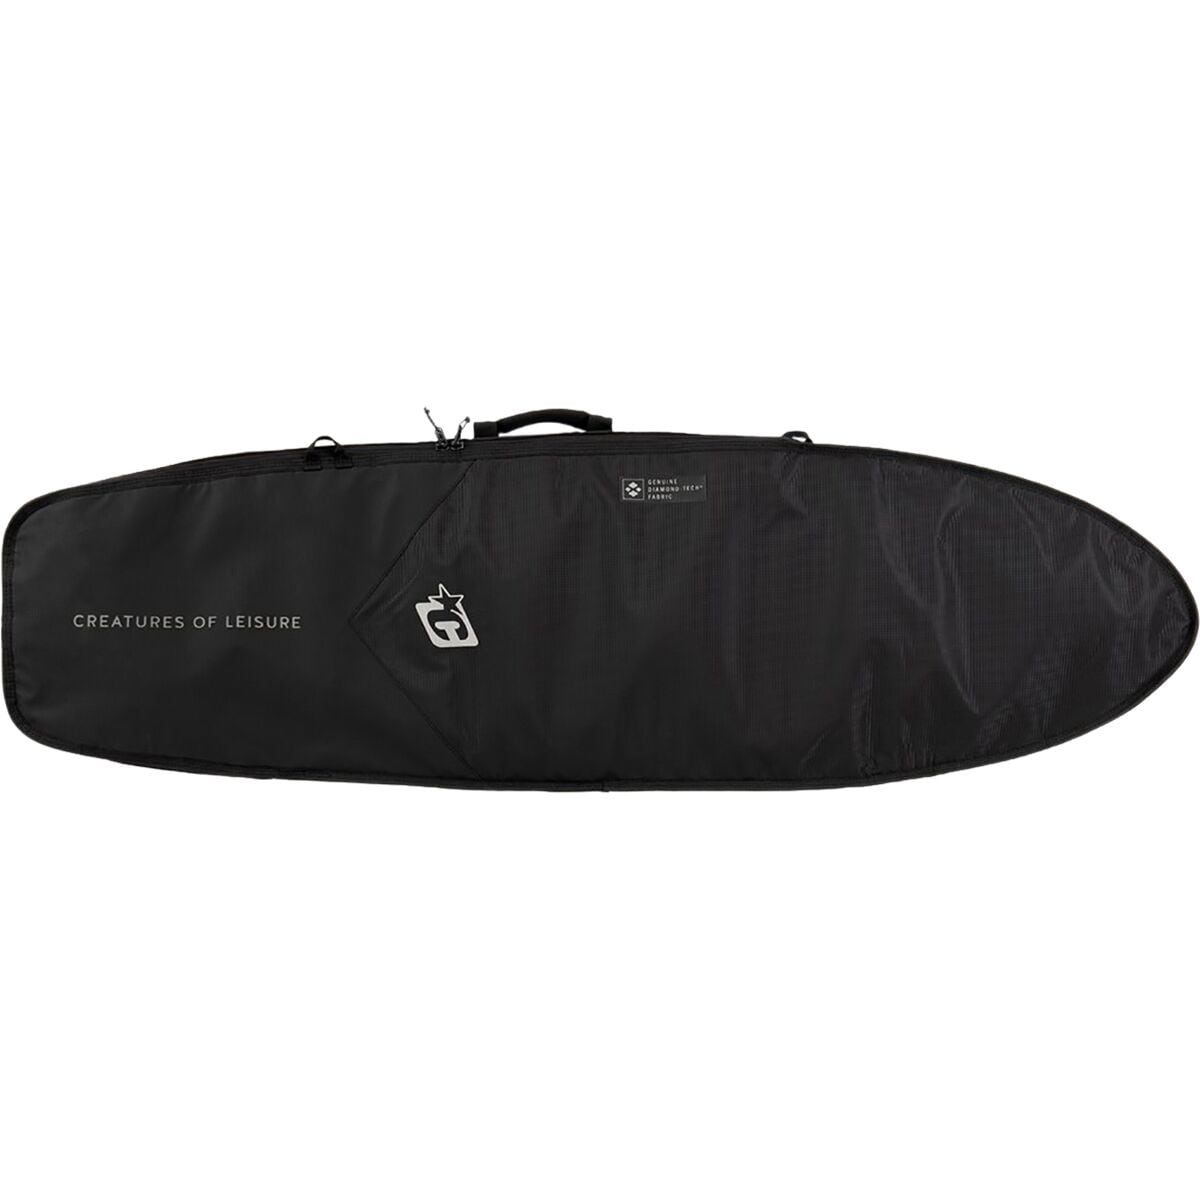 Creatures of Leisure Fish Day Use DT 2.0 Surboard Bag